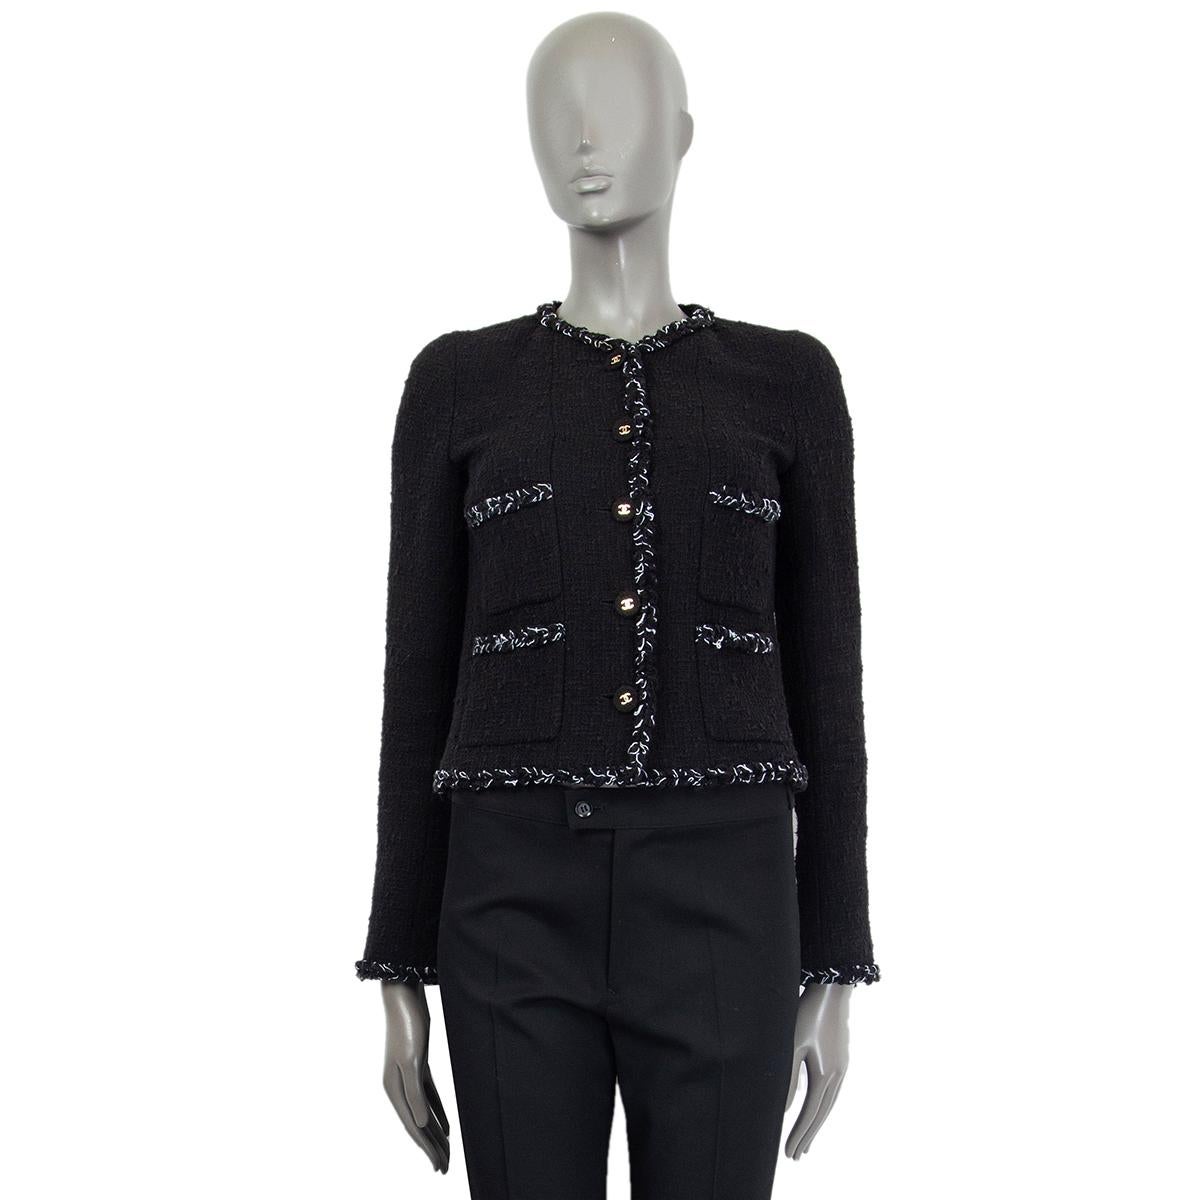 Chanel cropped double-patch jacket in black cotton (62%), acrylic (19%) and polyester (19%) bouclé with white trimming. Lined in black silk (96%) and elastane (4%) with gold-tone chain detail on the bottom. Has been worn and is in excellent